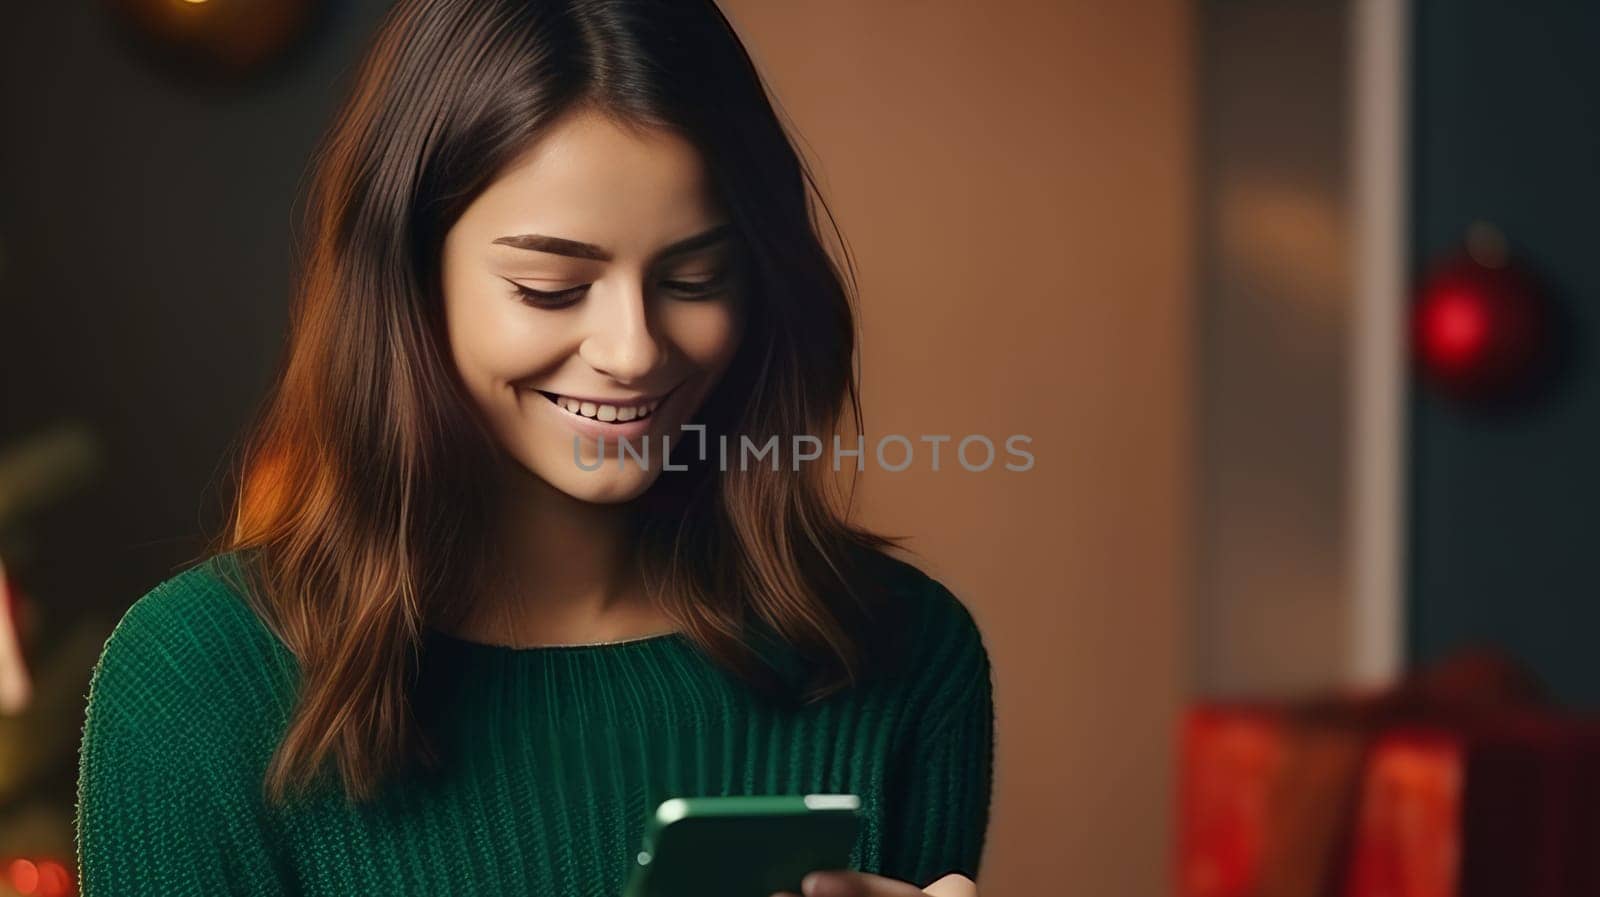 Young woman in green sweater orders New Year's gifts during Christmas holidays at home using smartphone and credit card by Alla_Yurtayeva